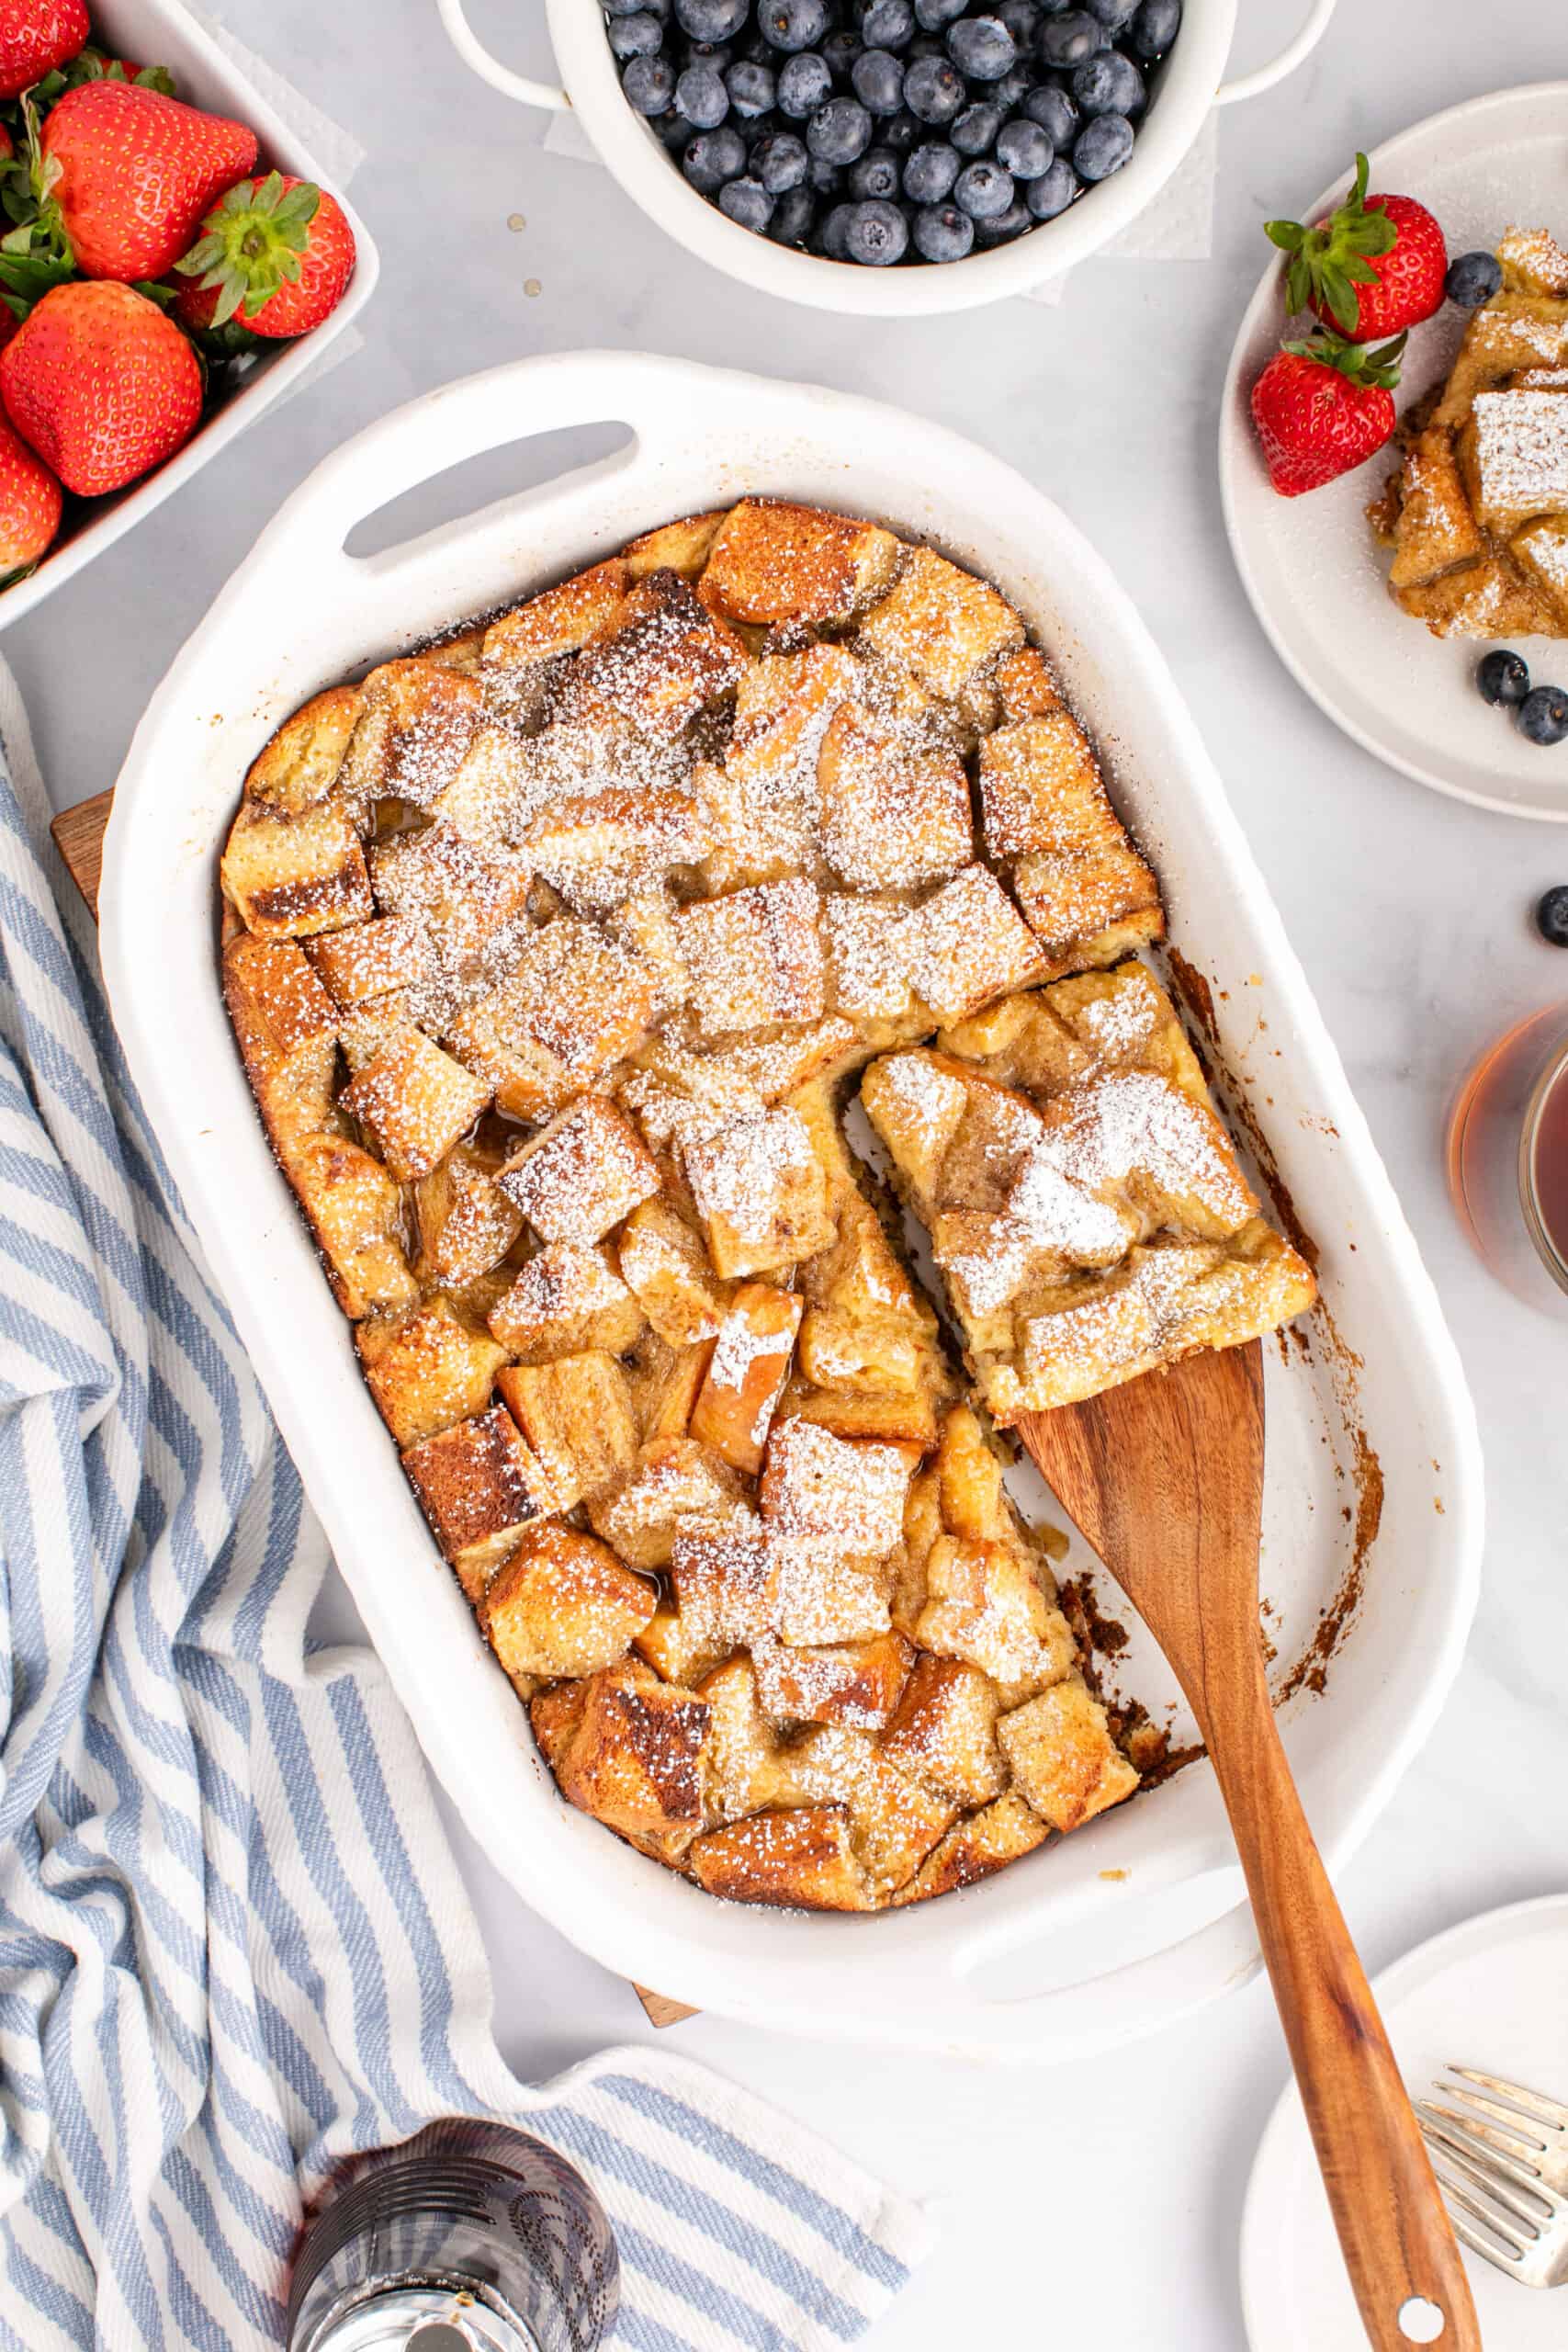 Maple French toast casserole in a white baking dish.